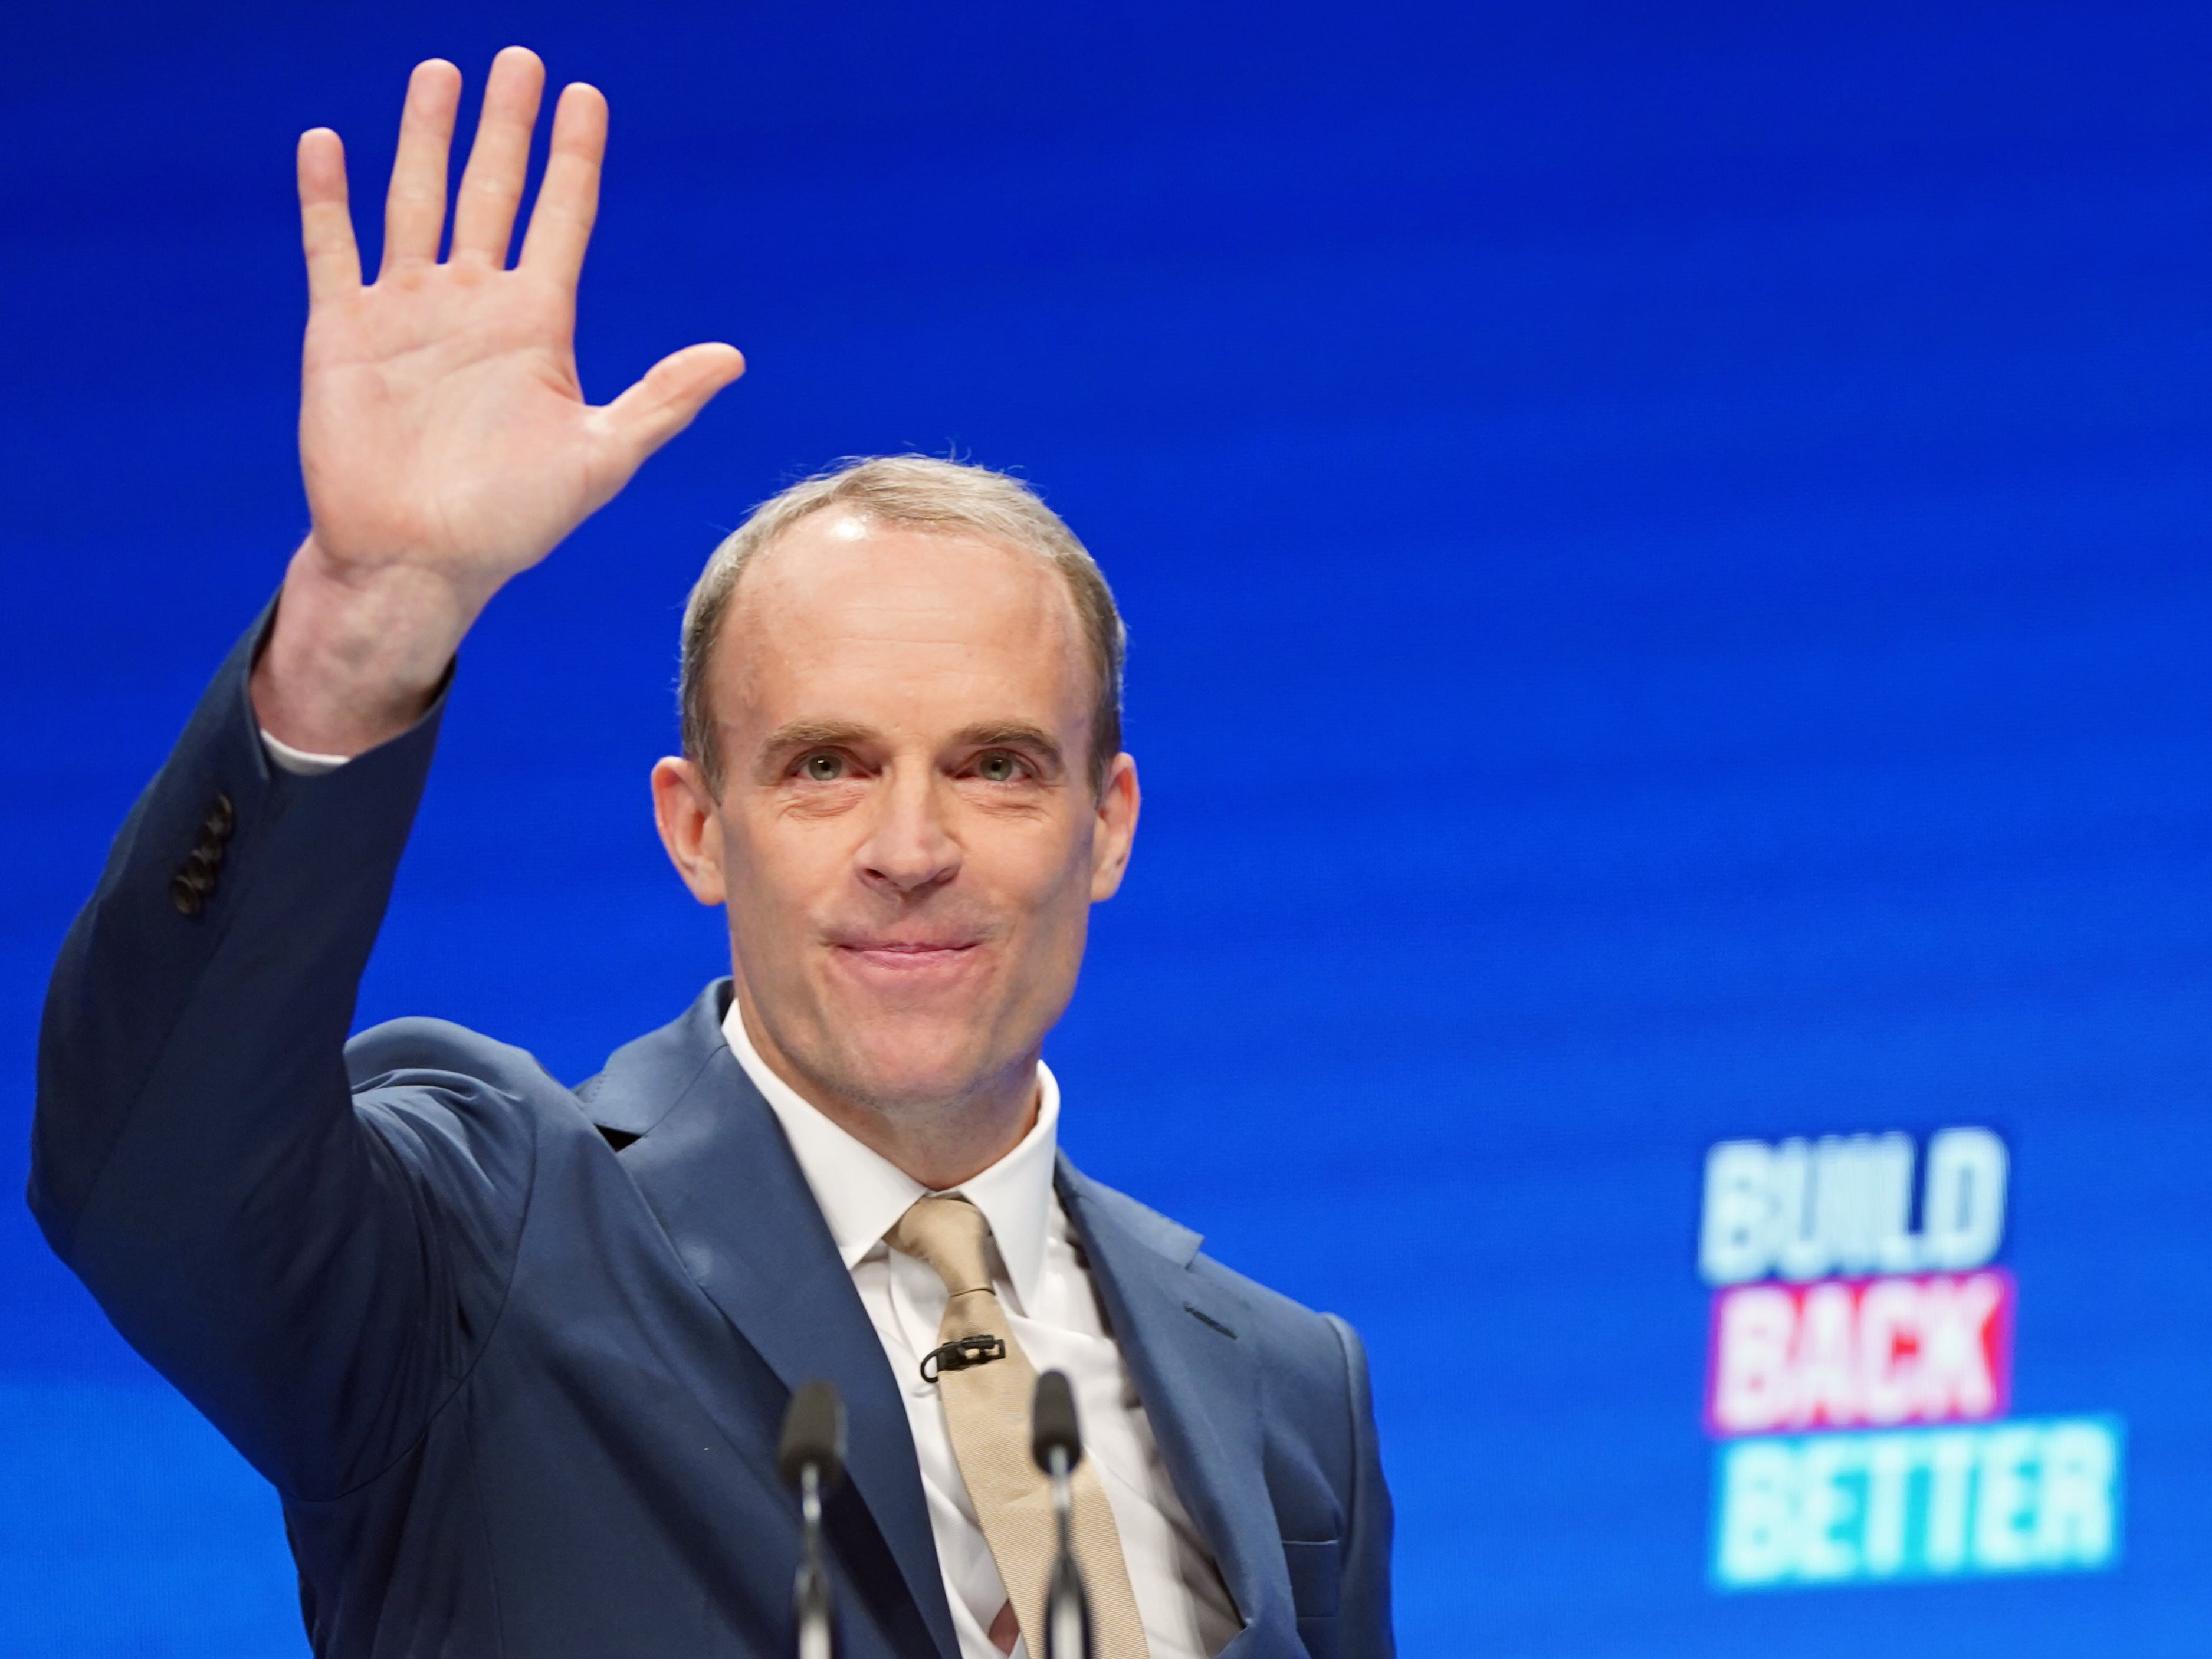 Mr Raab can hear the fading of the applause he won at Tory party conference